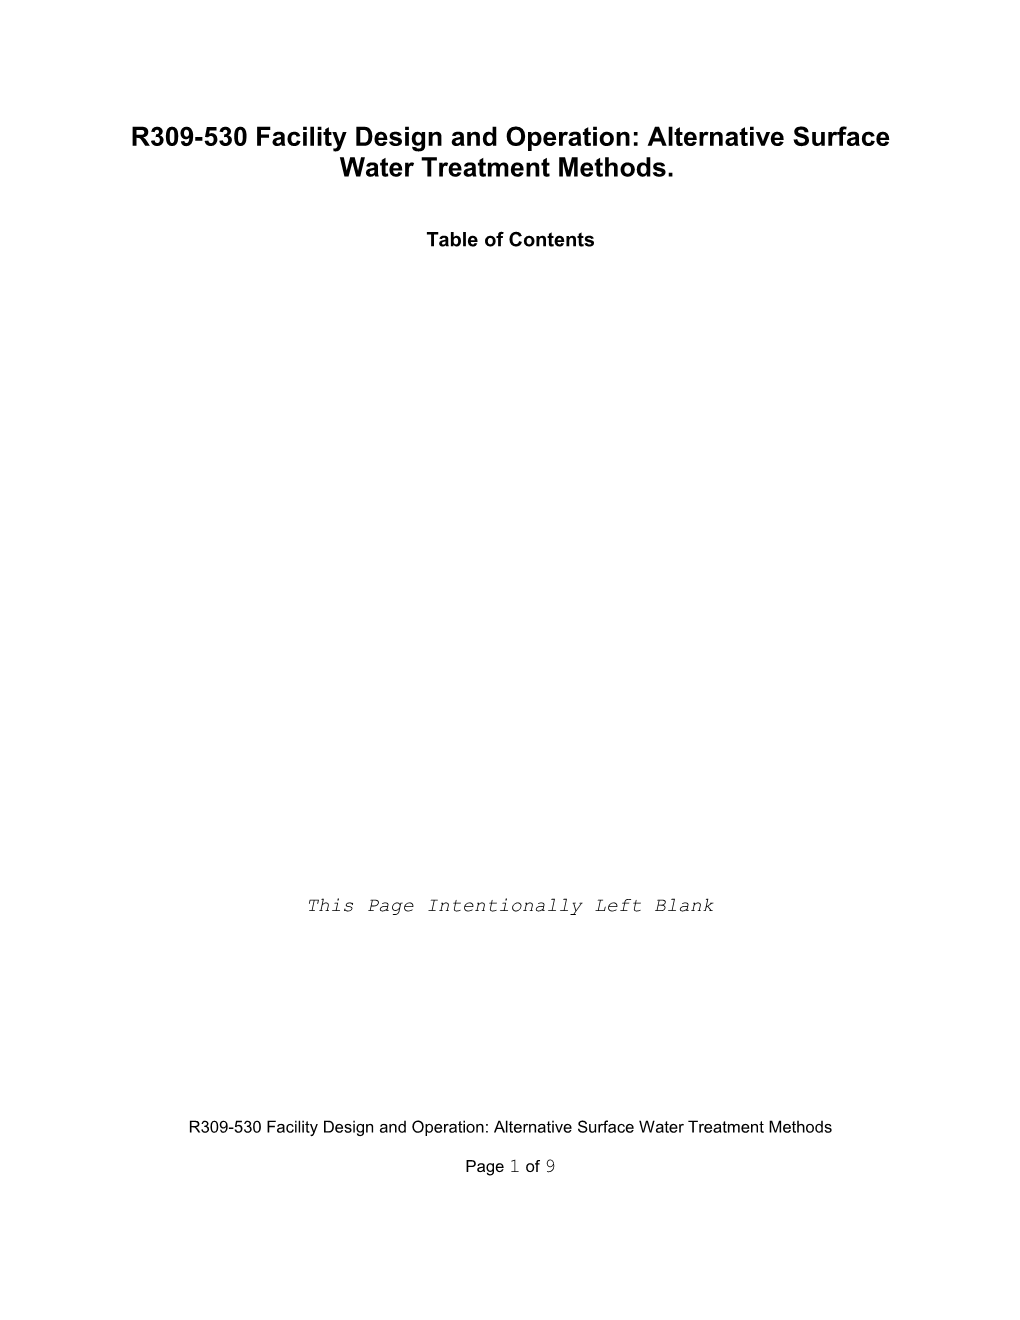 R309-530Facility Design and Operation:Alternative Surface Water Treatment Methods